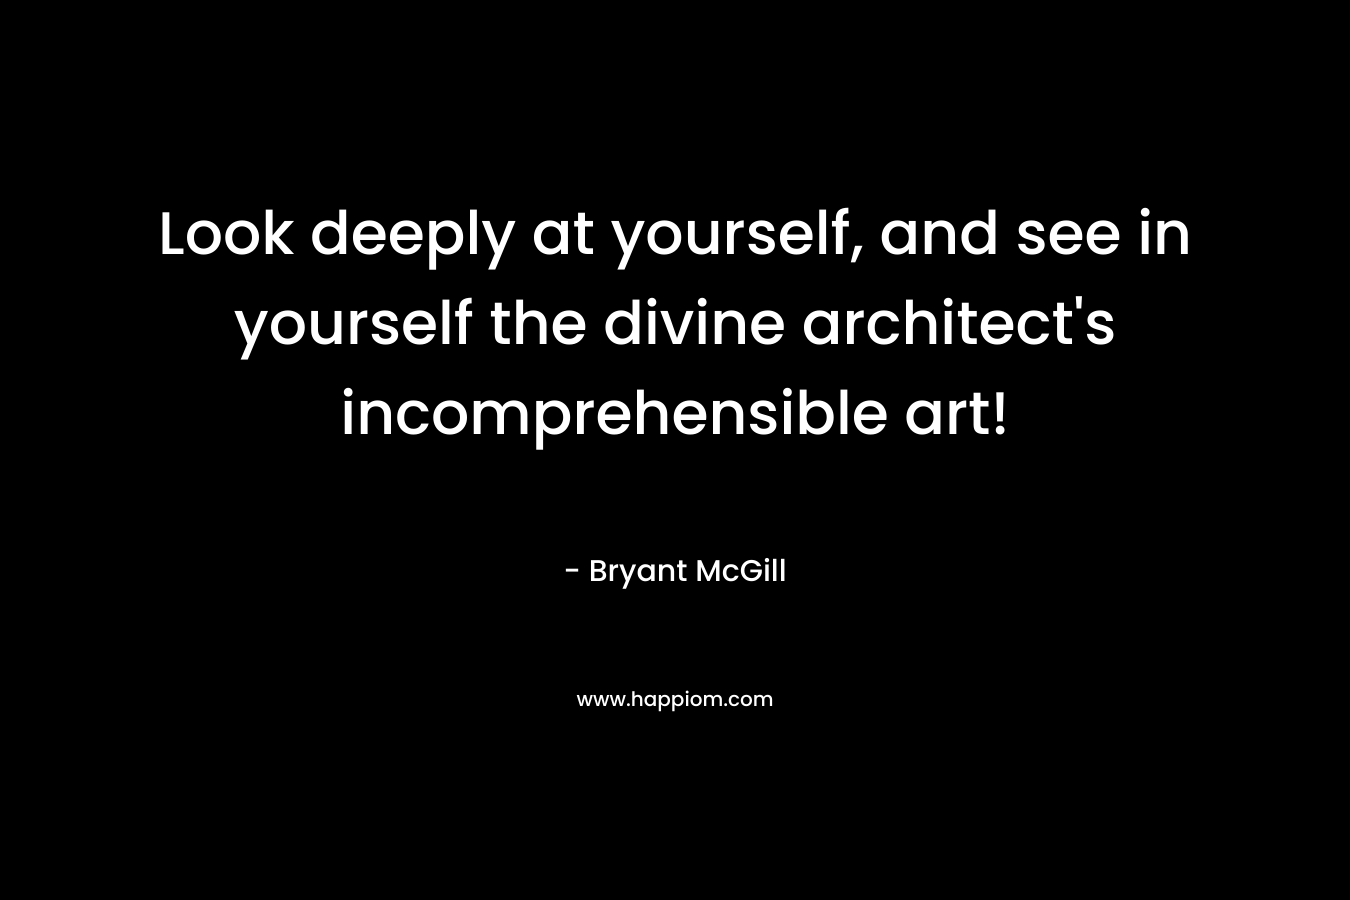 Look deeply at yourself, and see in yourself the divine architect's incomprehensible art!